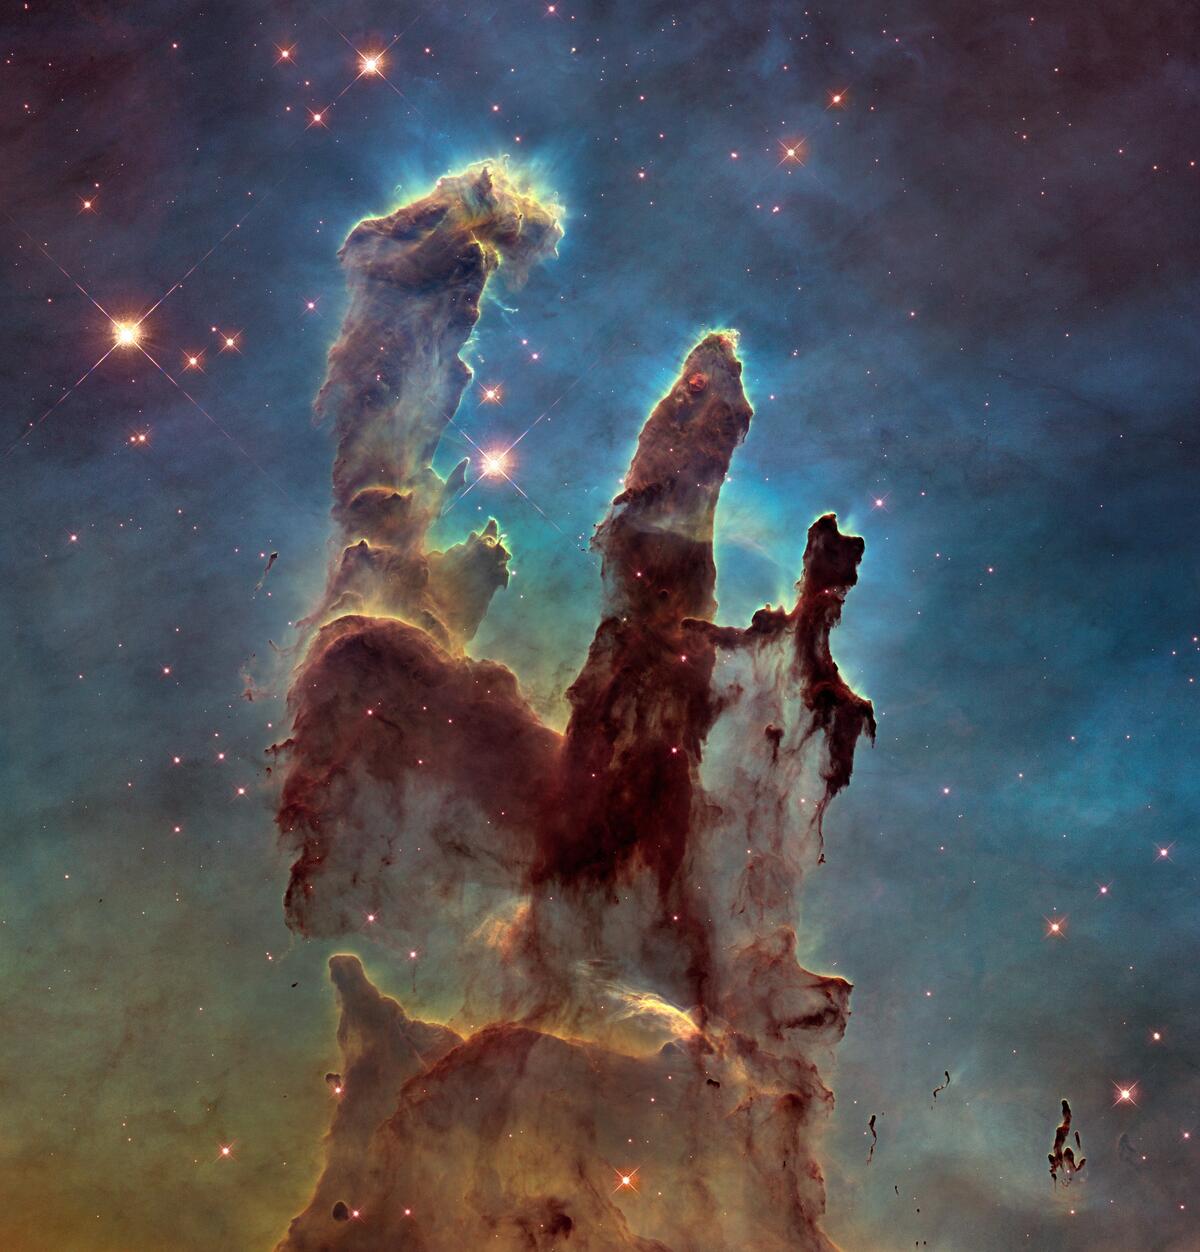 Hubble Space Images of the nebula